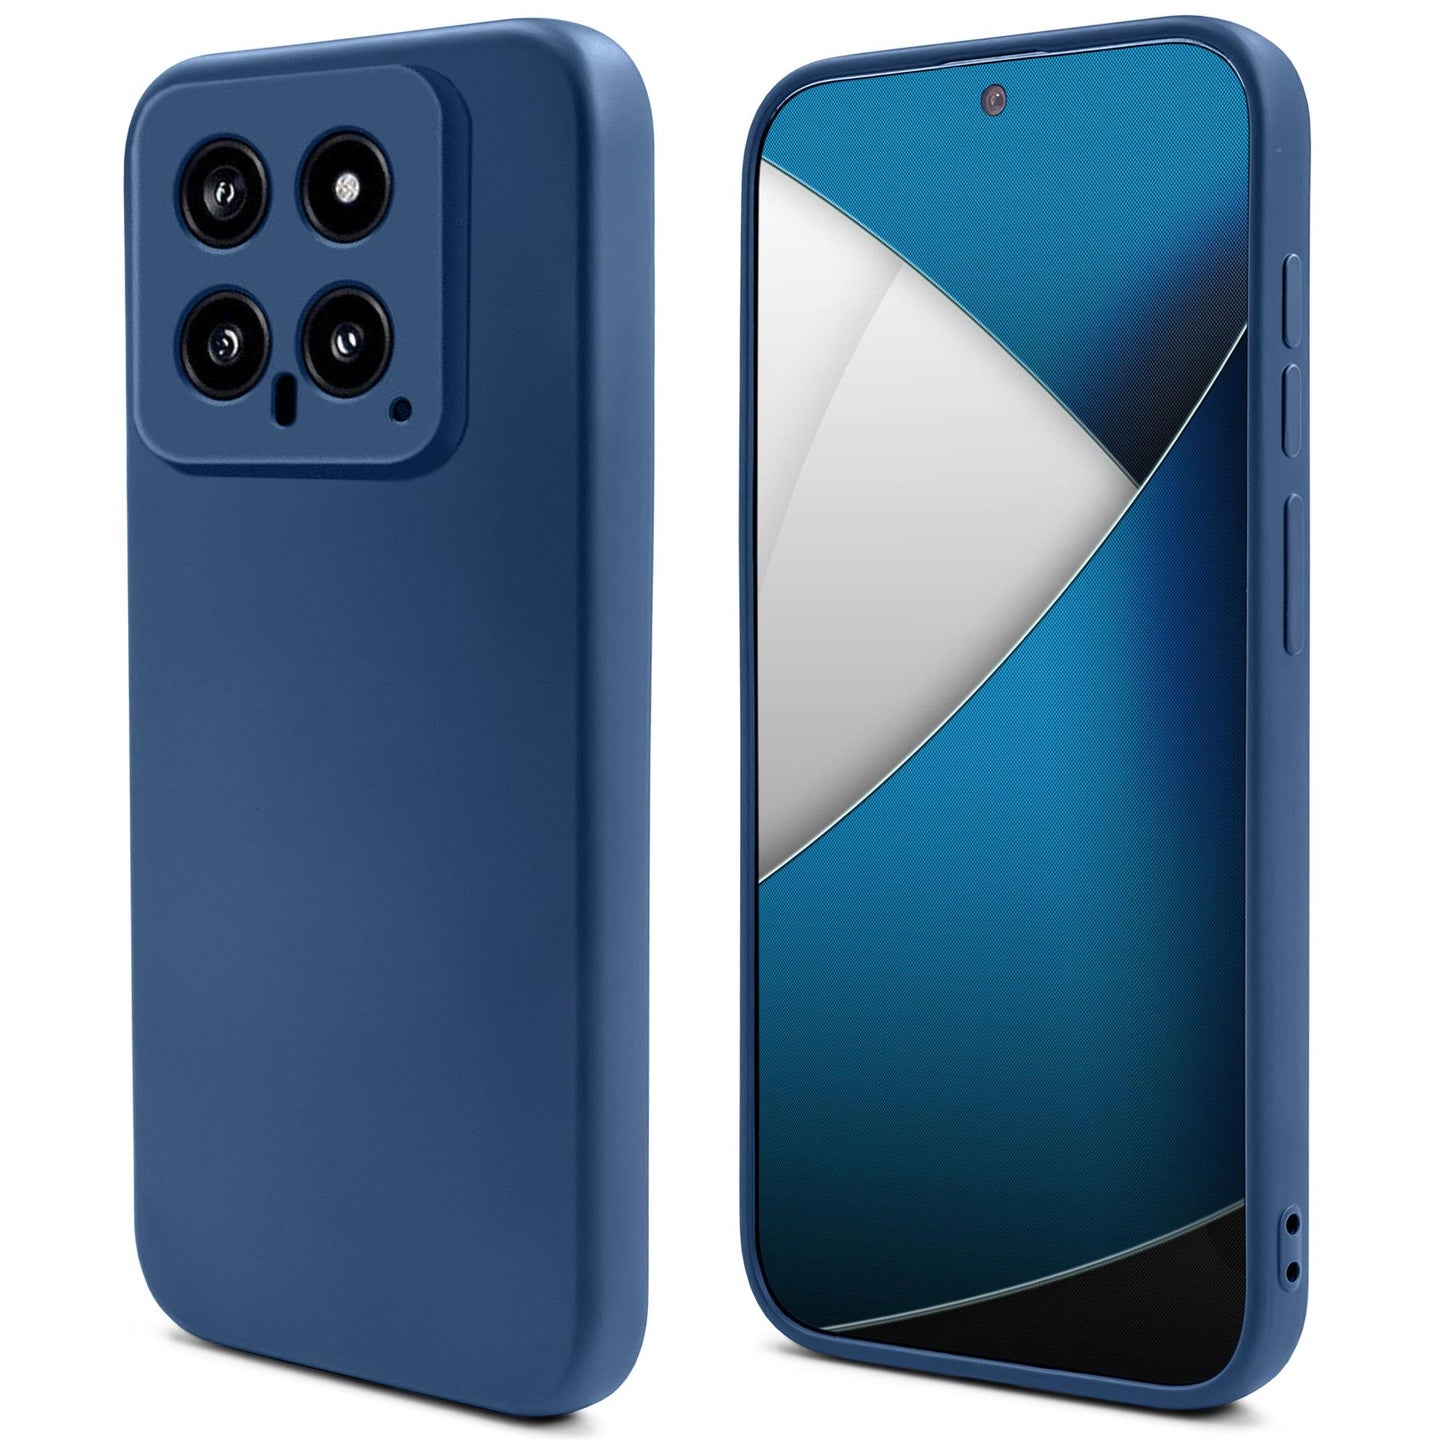 Moozy Lifestyle. Silicone Case for Xiaomi 14, Midnight Blue - Liquid Silicone Lightweight Cover with Matte Finish and Soft Microfiber Lining, Premium Silicone Case